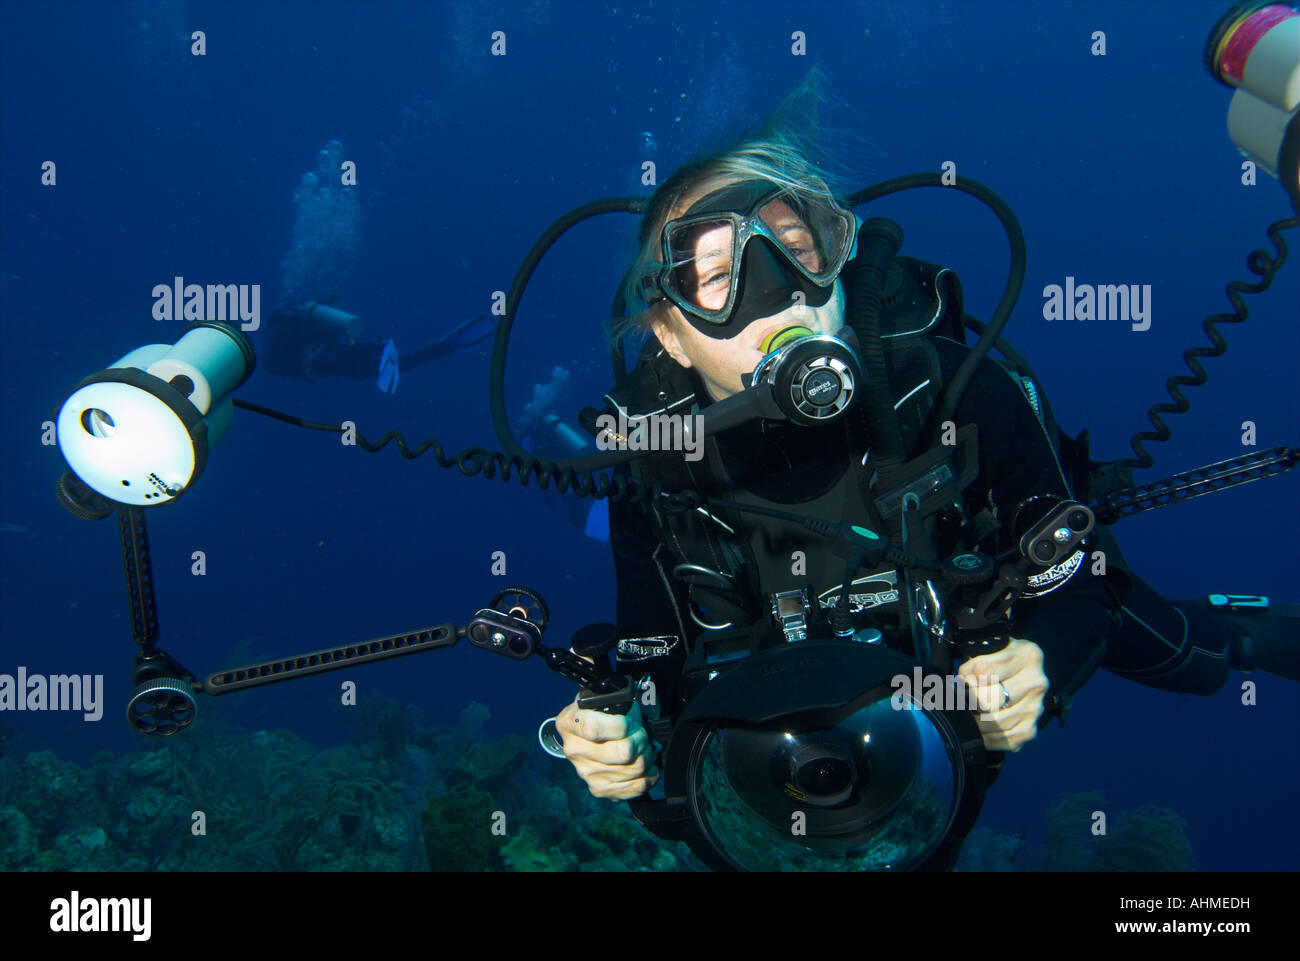 Underwater scuba diving photographer holding camera in housing Stock Photo